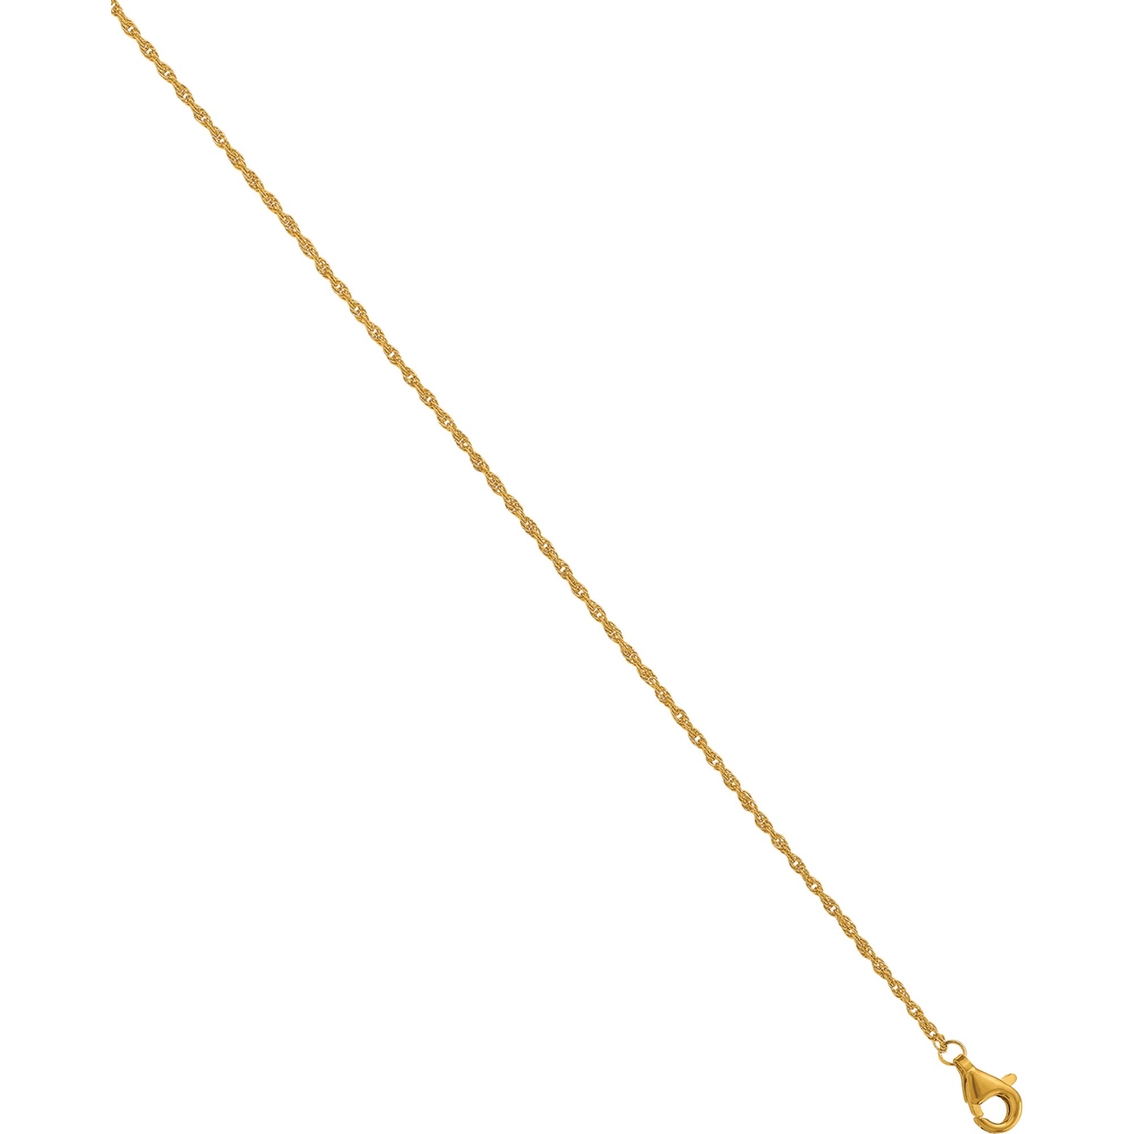 24K Pure Gold 1.35mm Rope Chain Necklace - Image 3 of 6